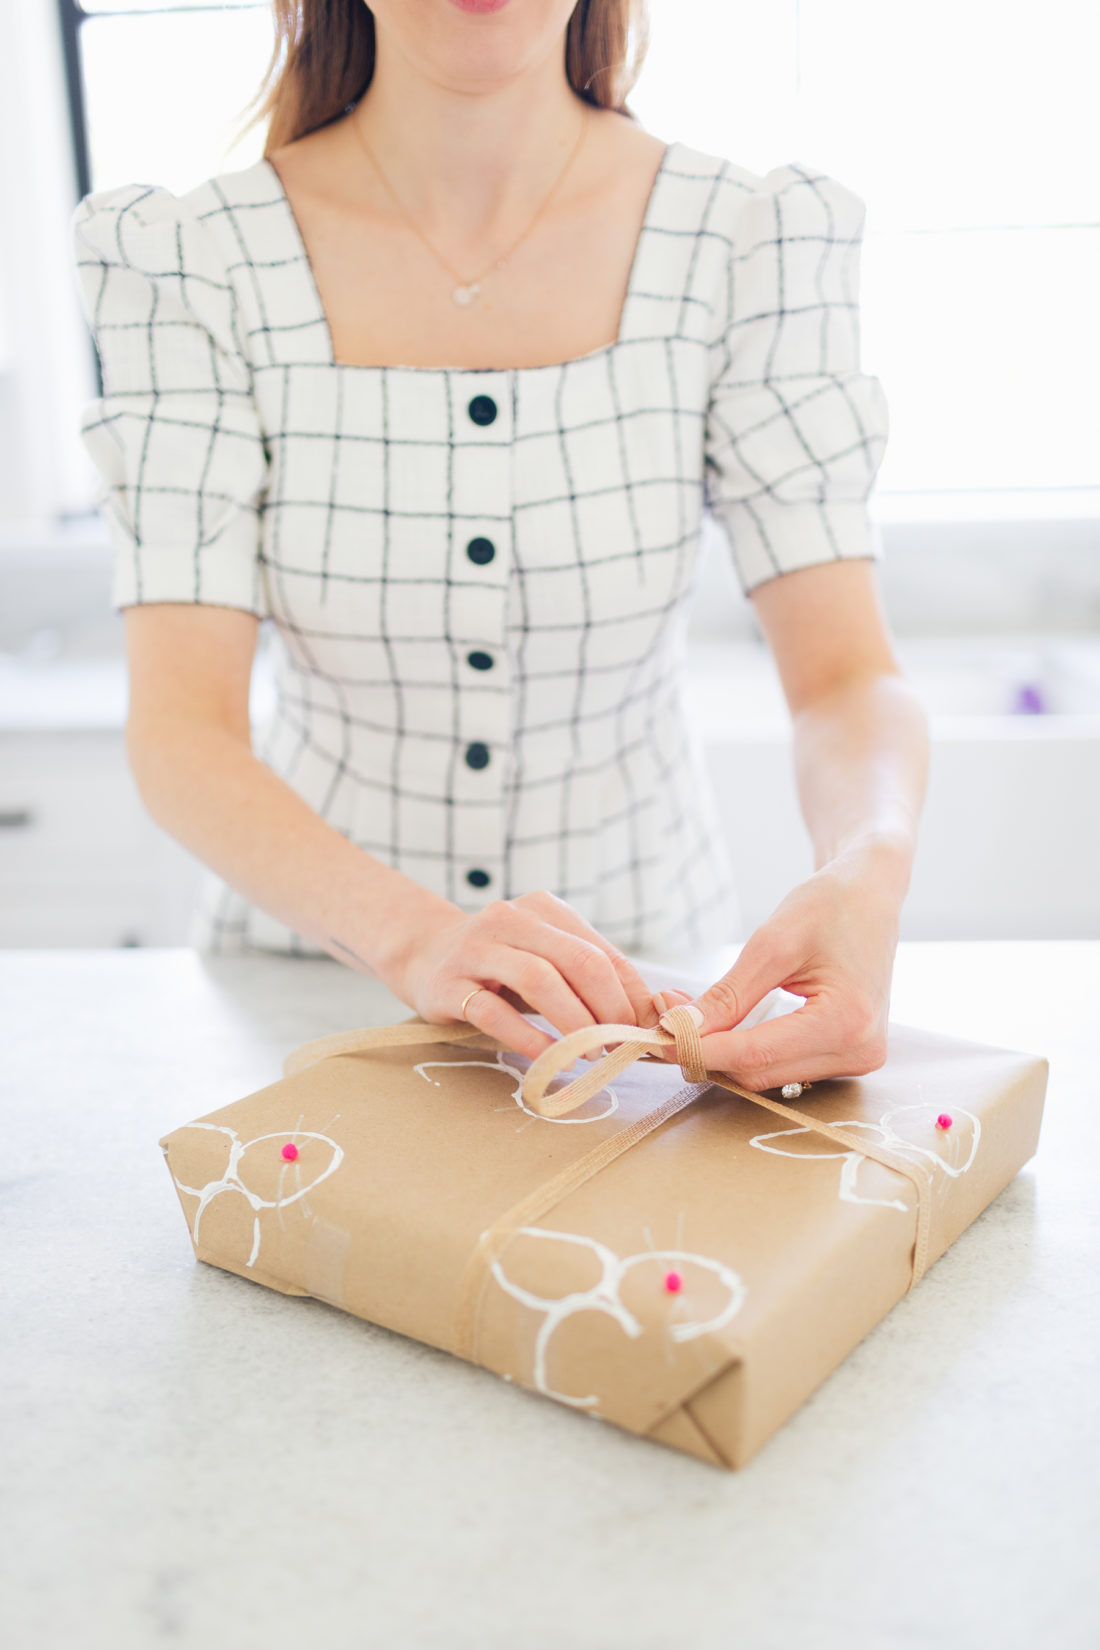 Eva Amurri Martino wraps a gift in stamped Easter wrapping paper